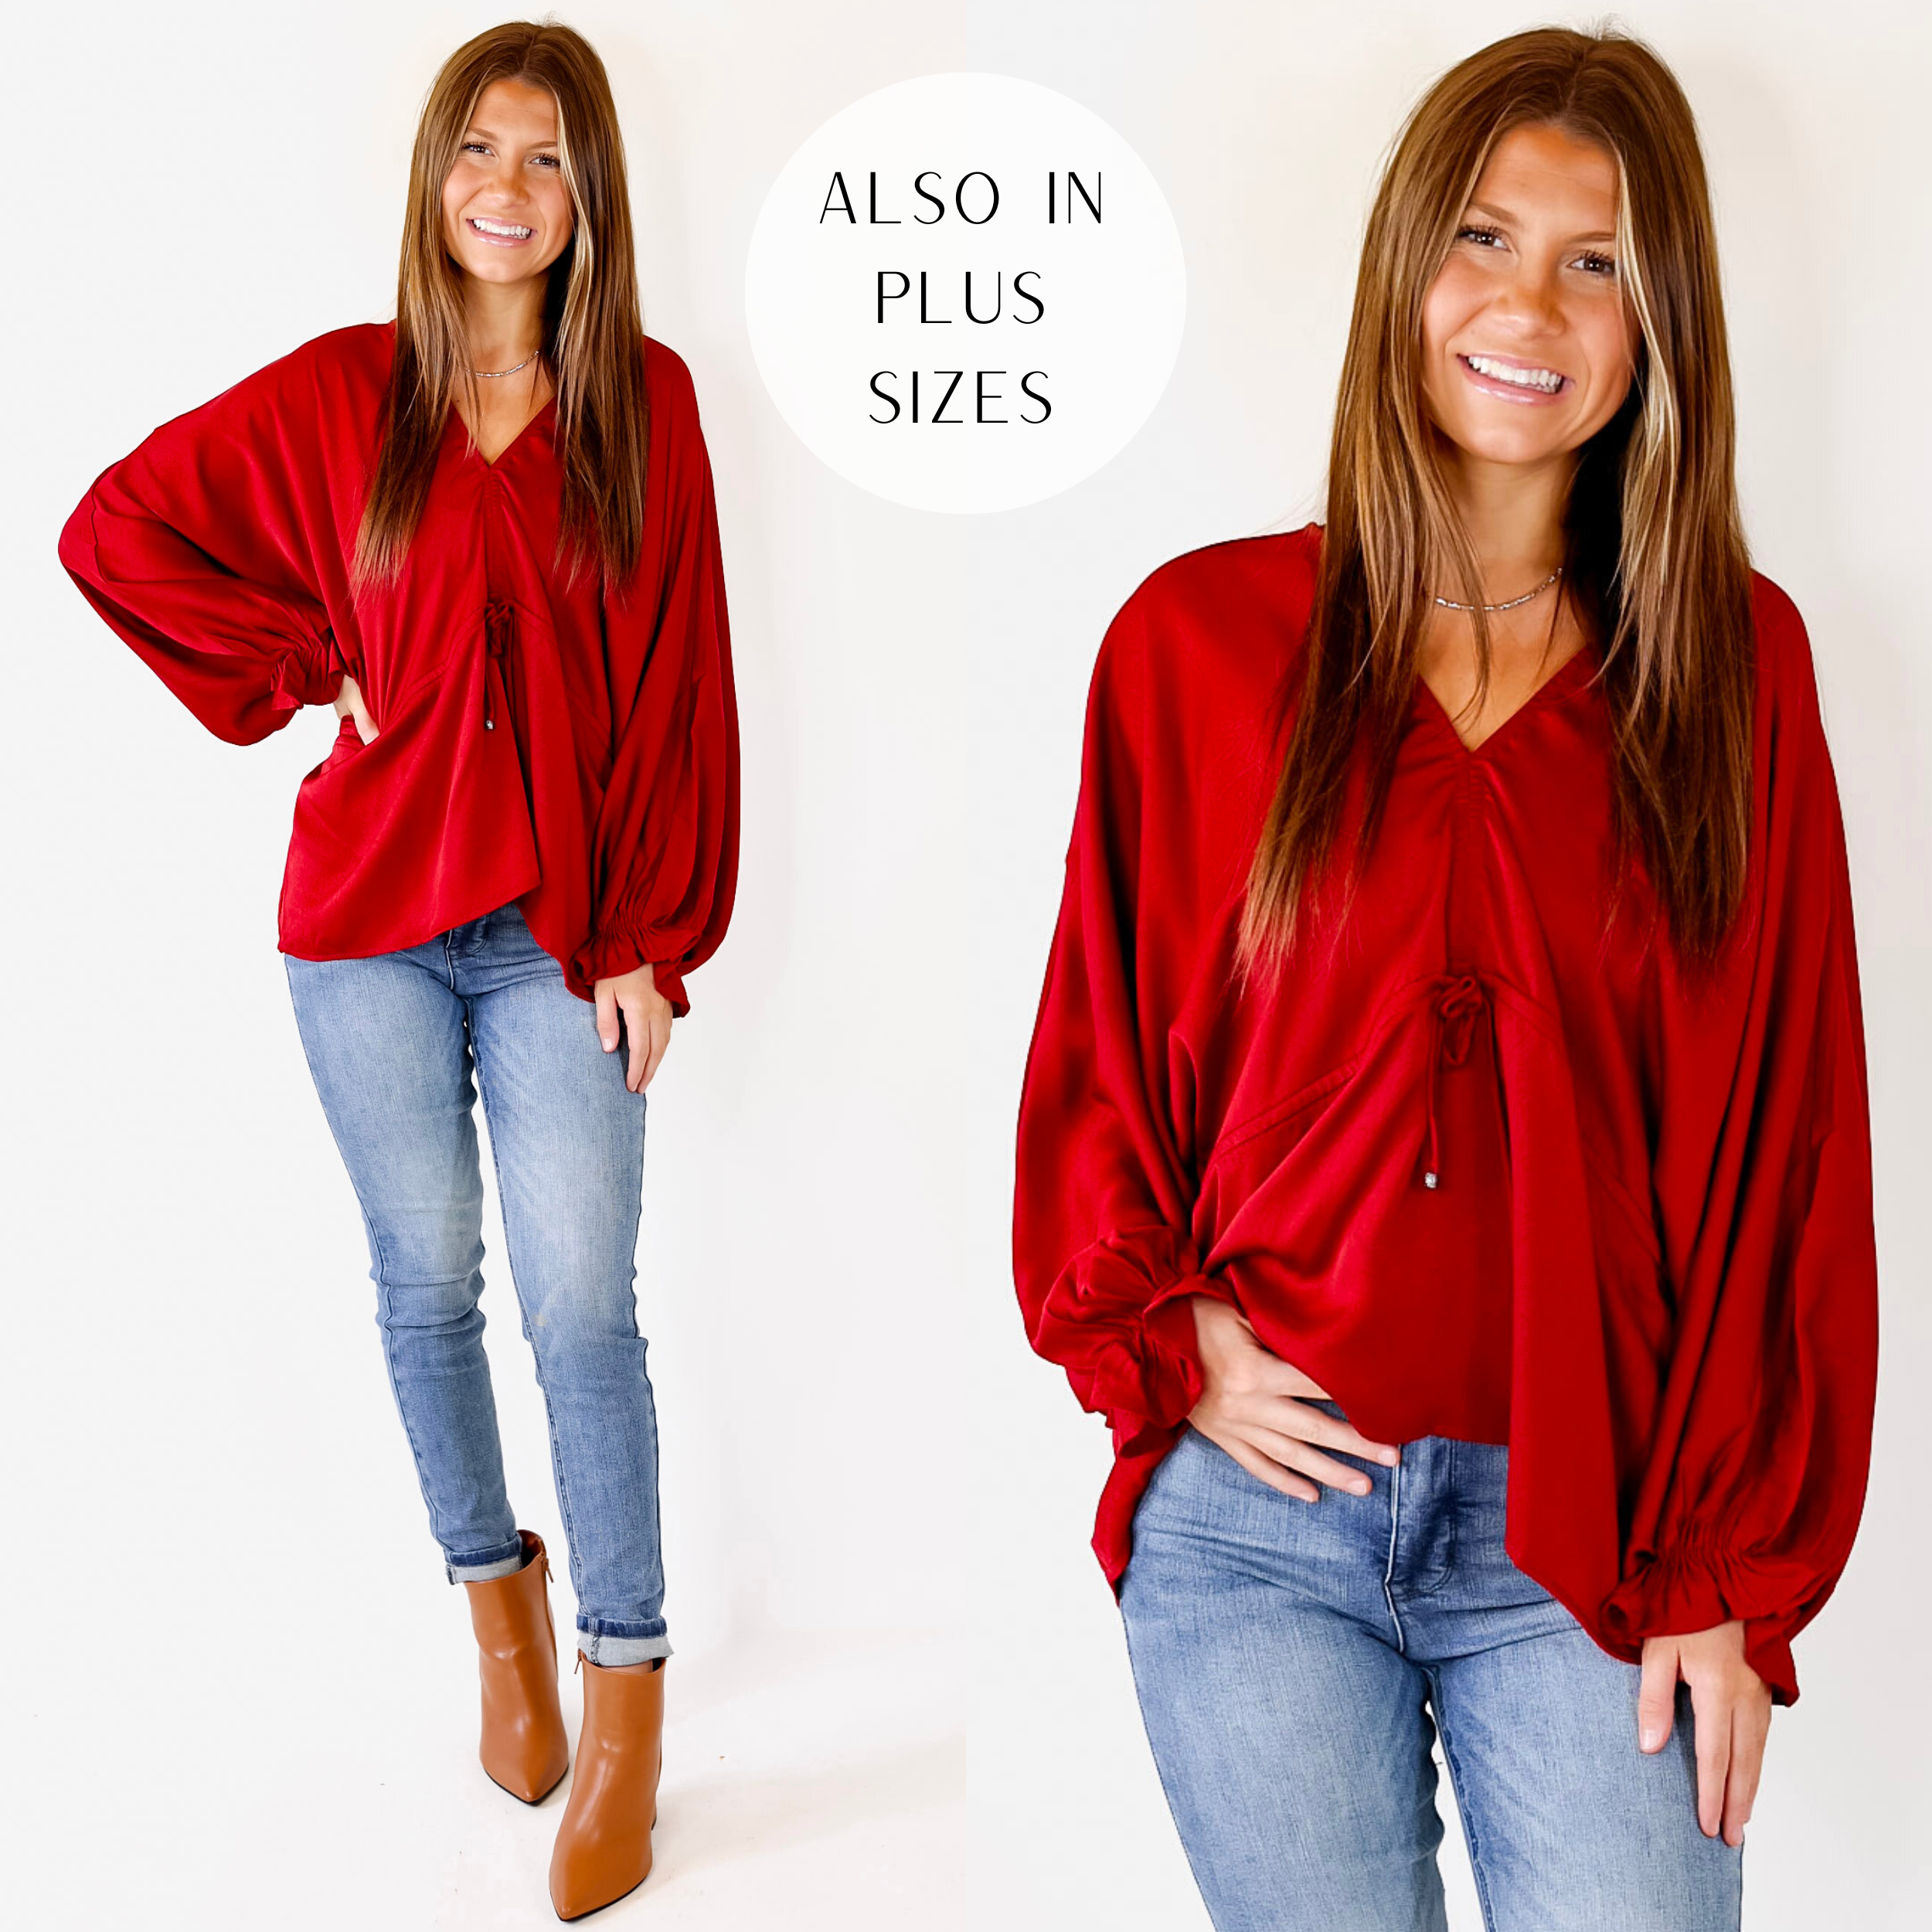 Model is wearing a red long sleeve top featuring a V neckline, puffed sleeves, tie waist, and flowy body.